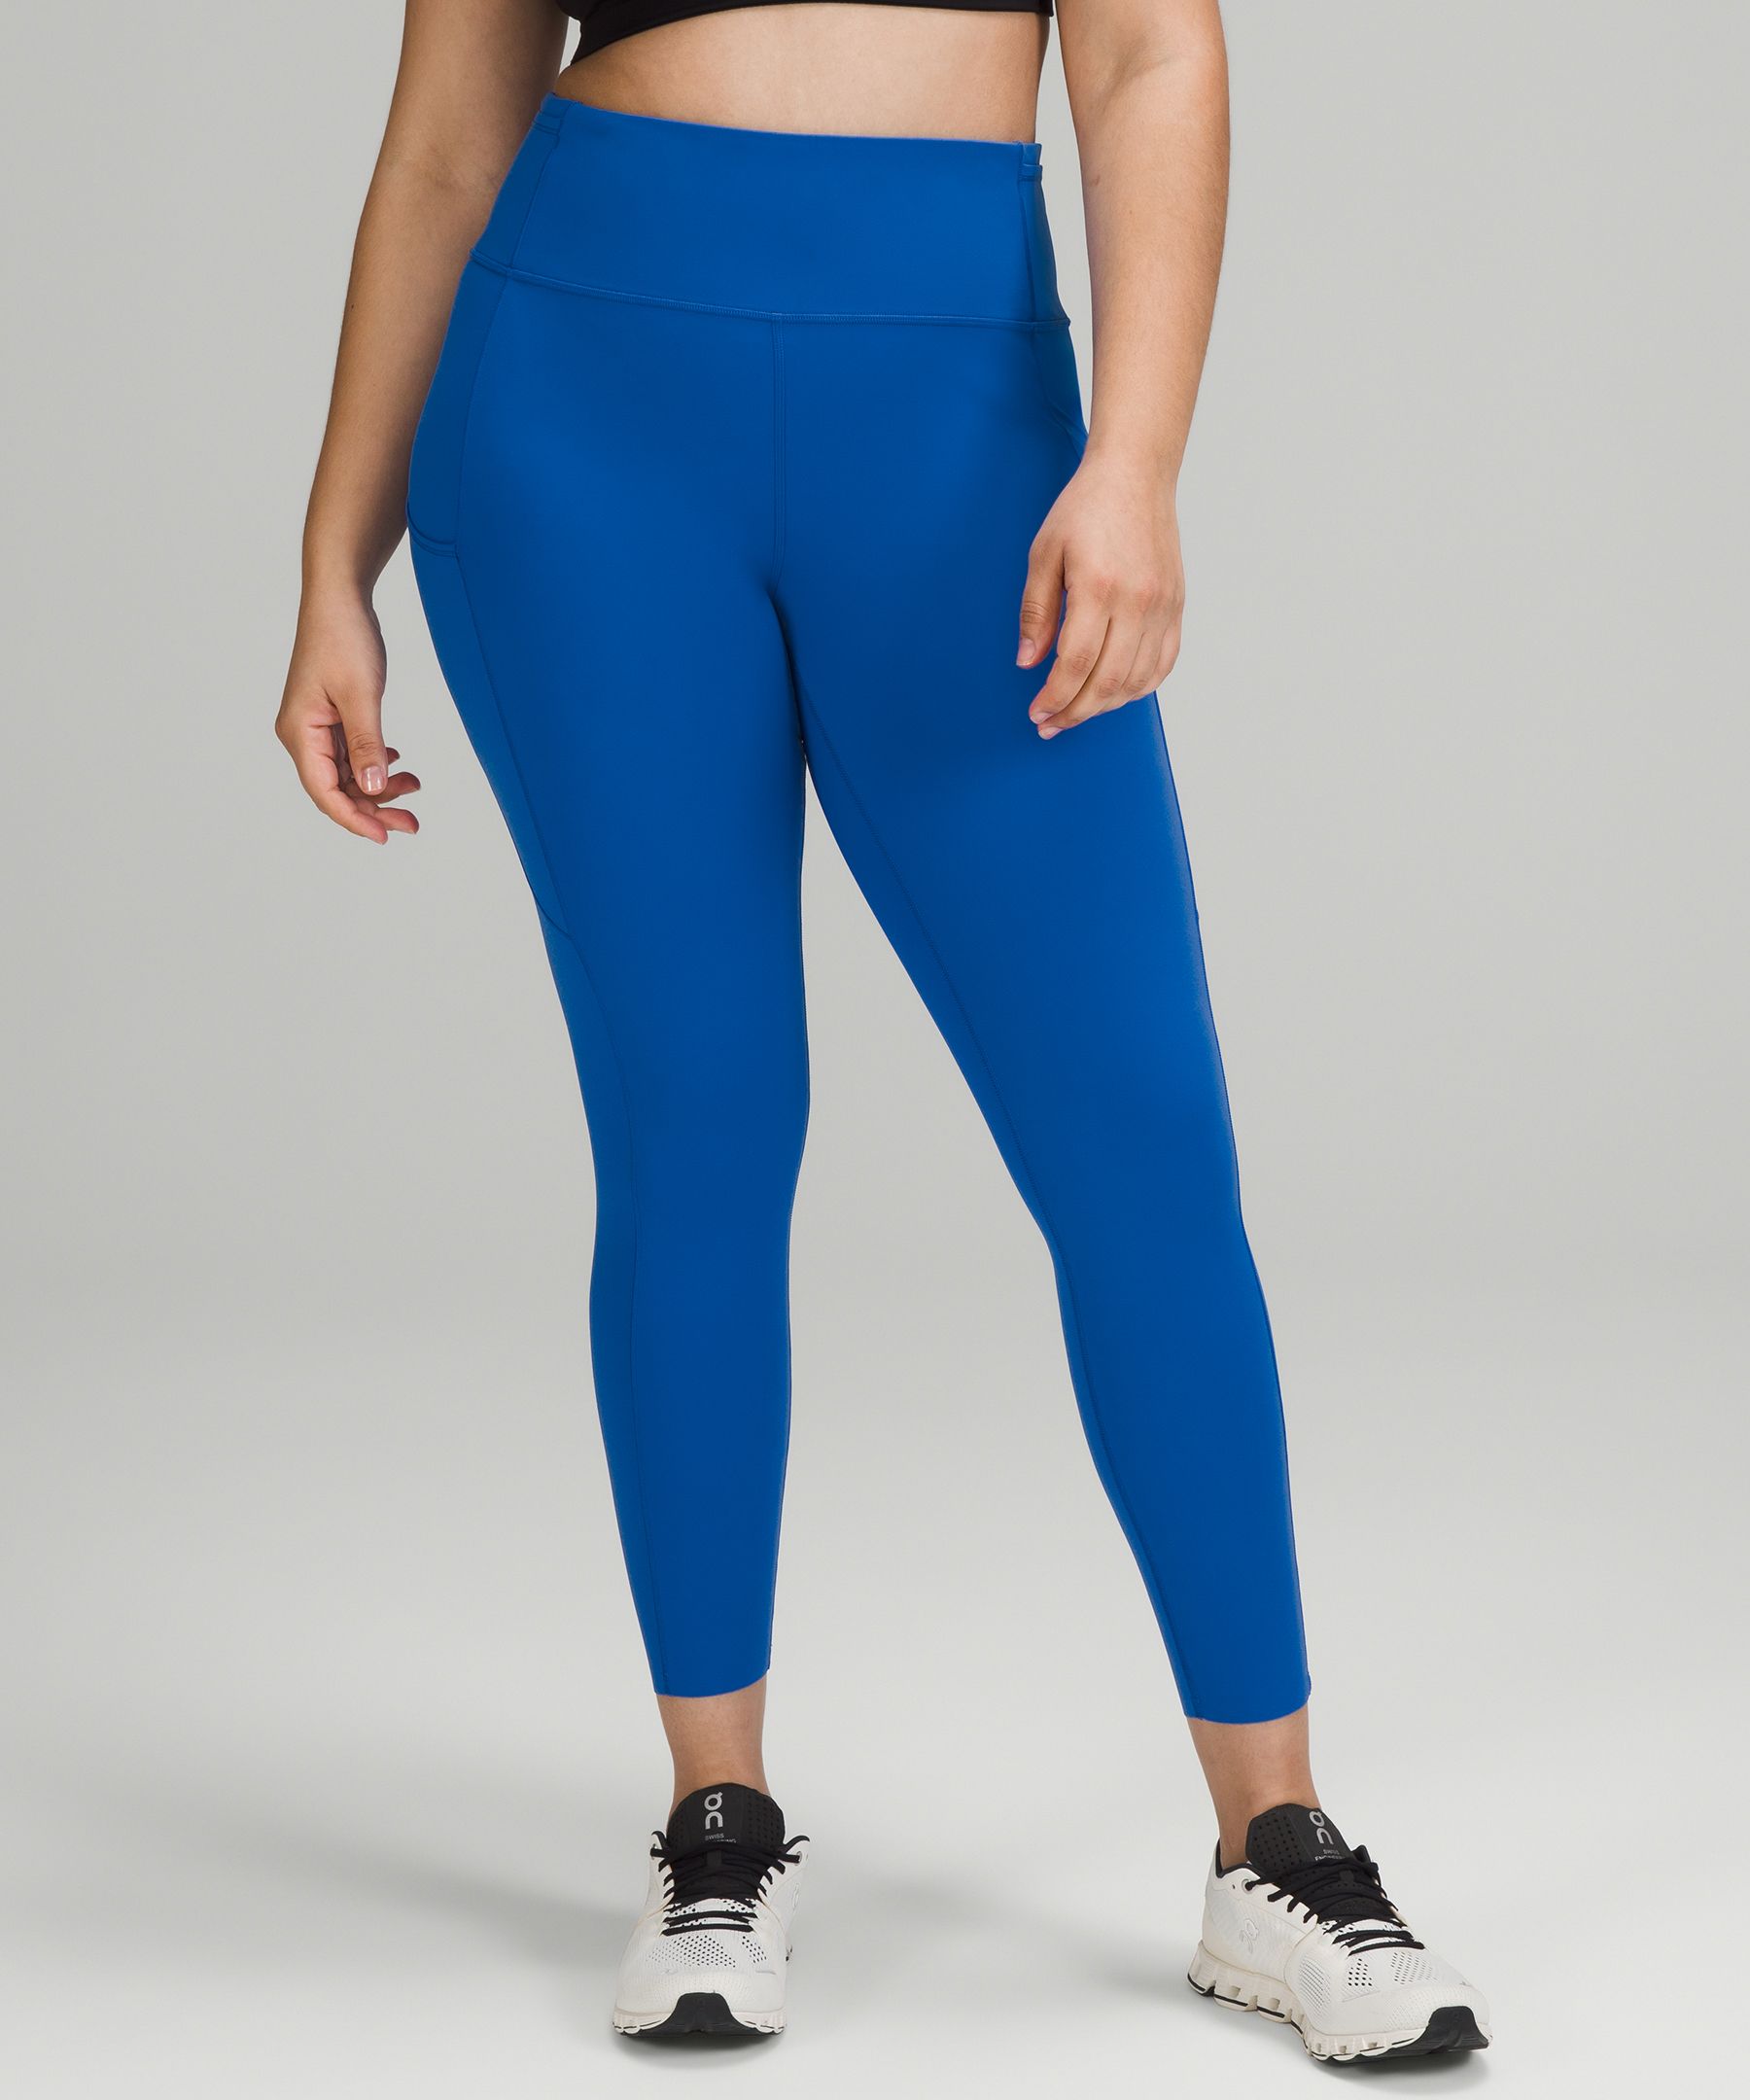 High Waist Tights with Control Top Navy 1 by Hue